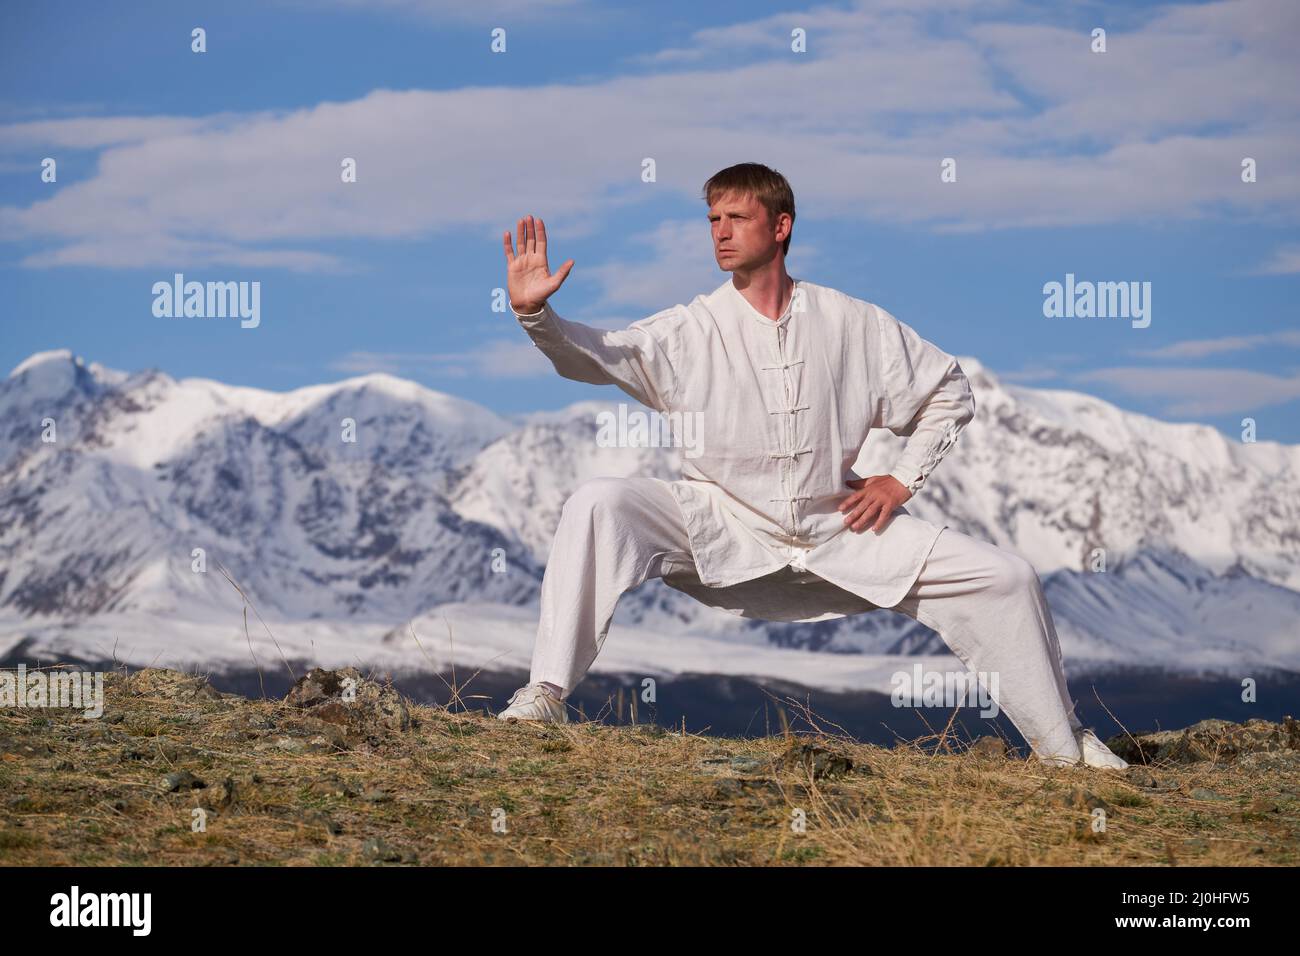 Wushu master in a white sports uniform training kungfu in nature on background of snowy mountains. Stock Photo